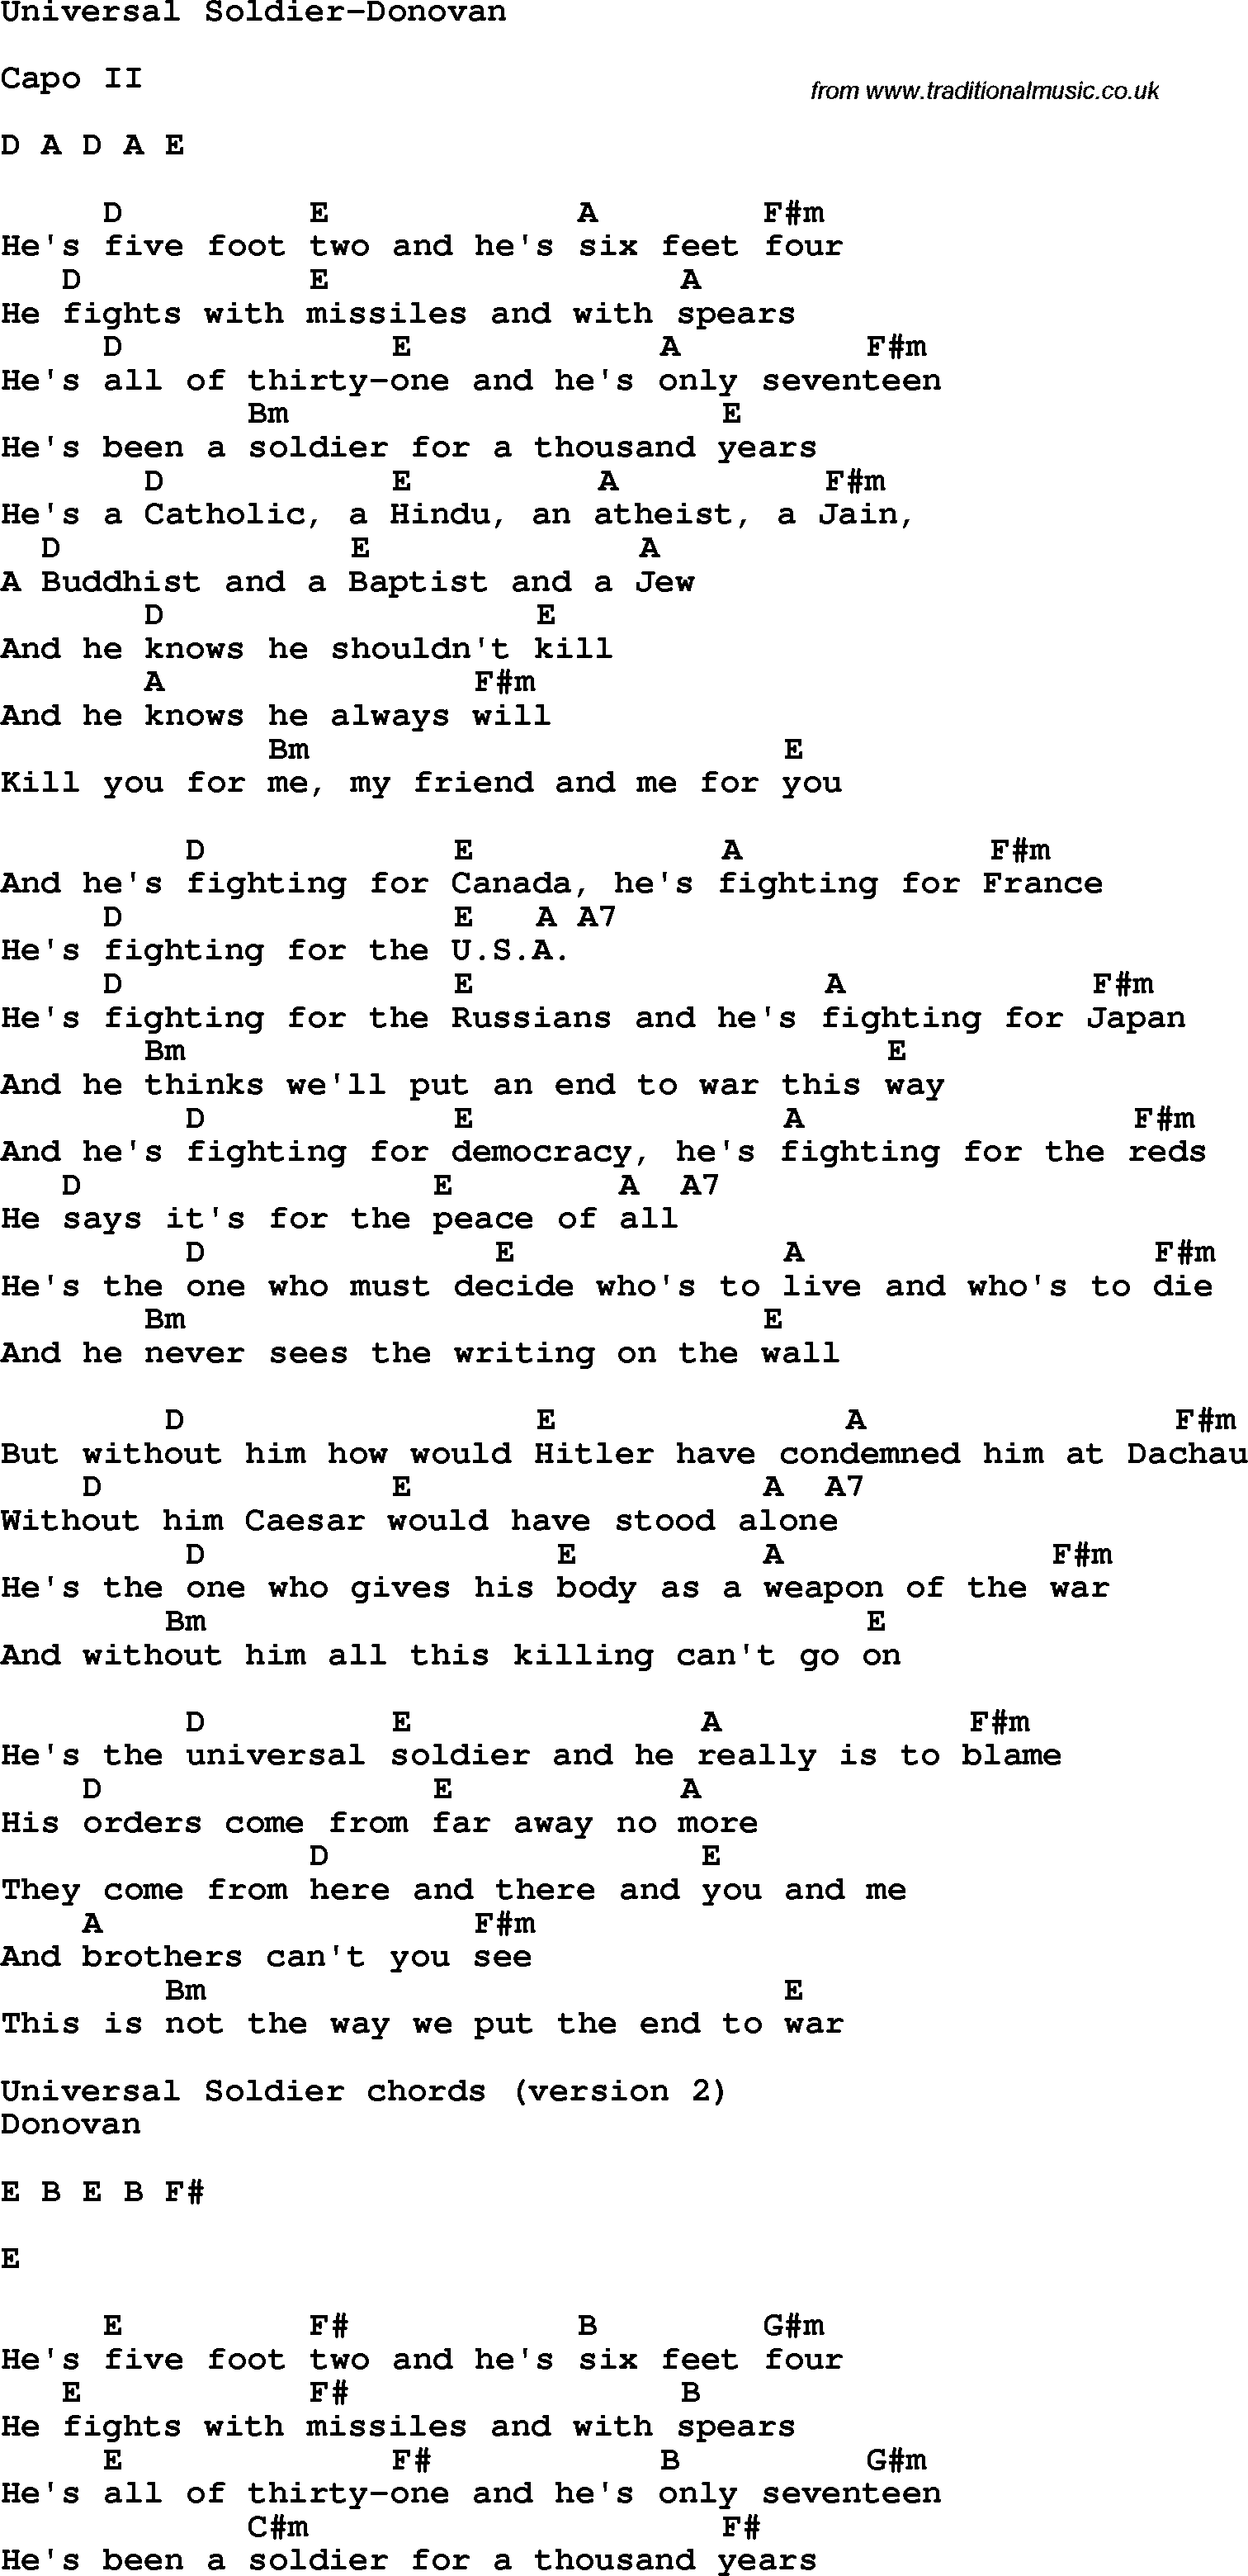 Protest Song Universal Soldier-Donovan lyrics and chords